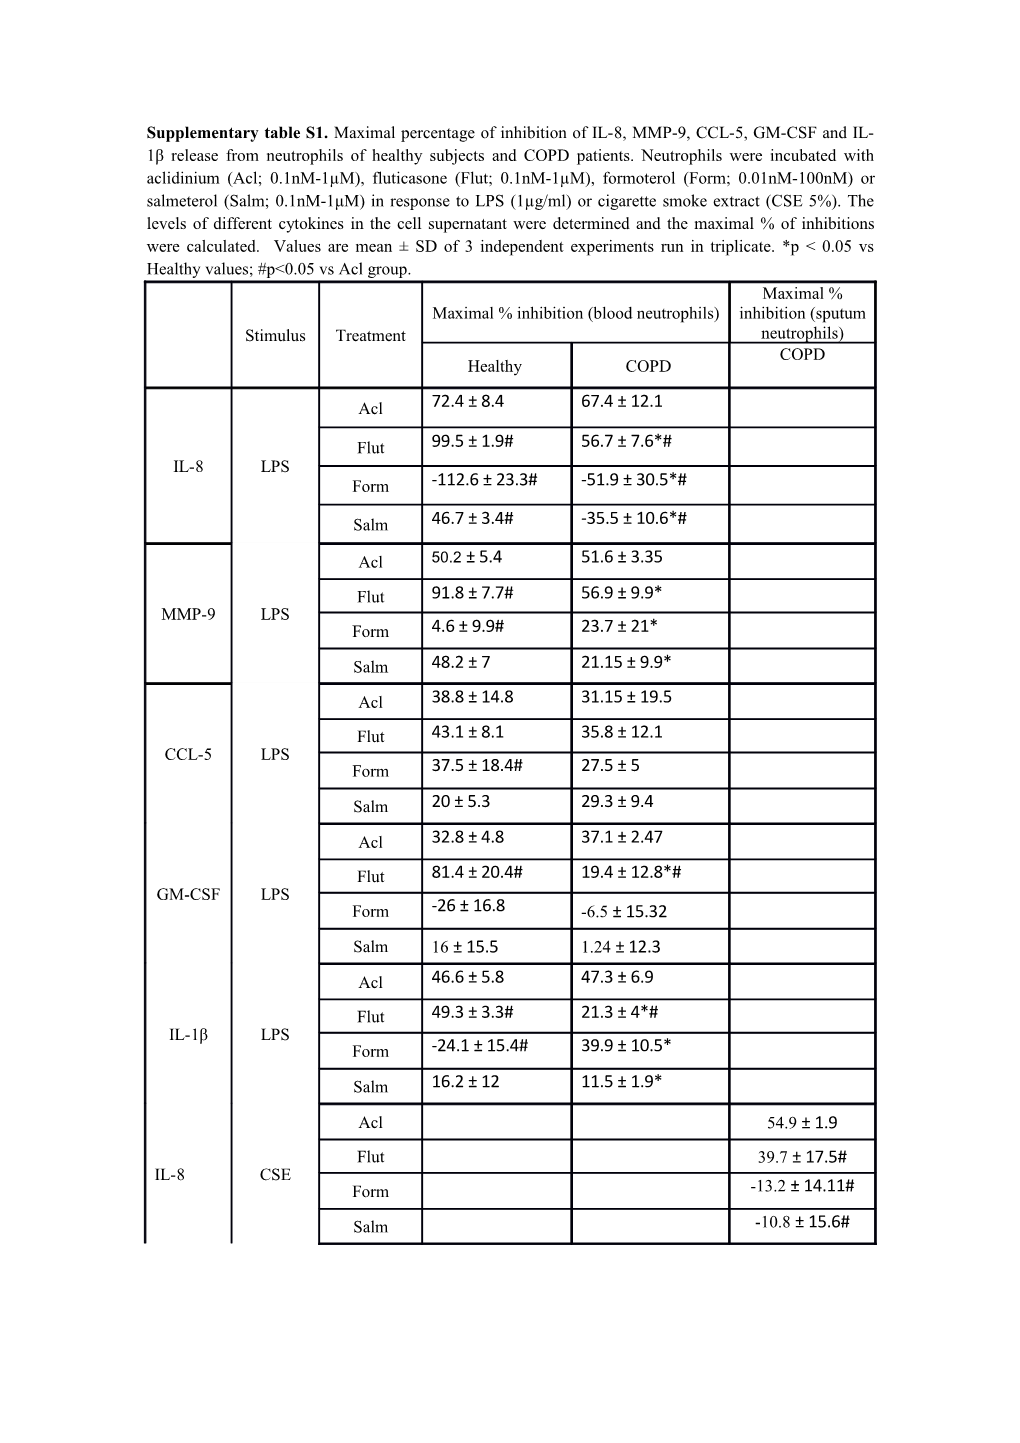 Supplementary Table S1. Maximal Percentage of Inhibition of IL-8, MMP-9, CCL-5, GM-CSF